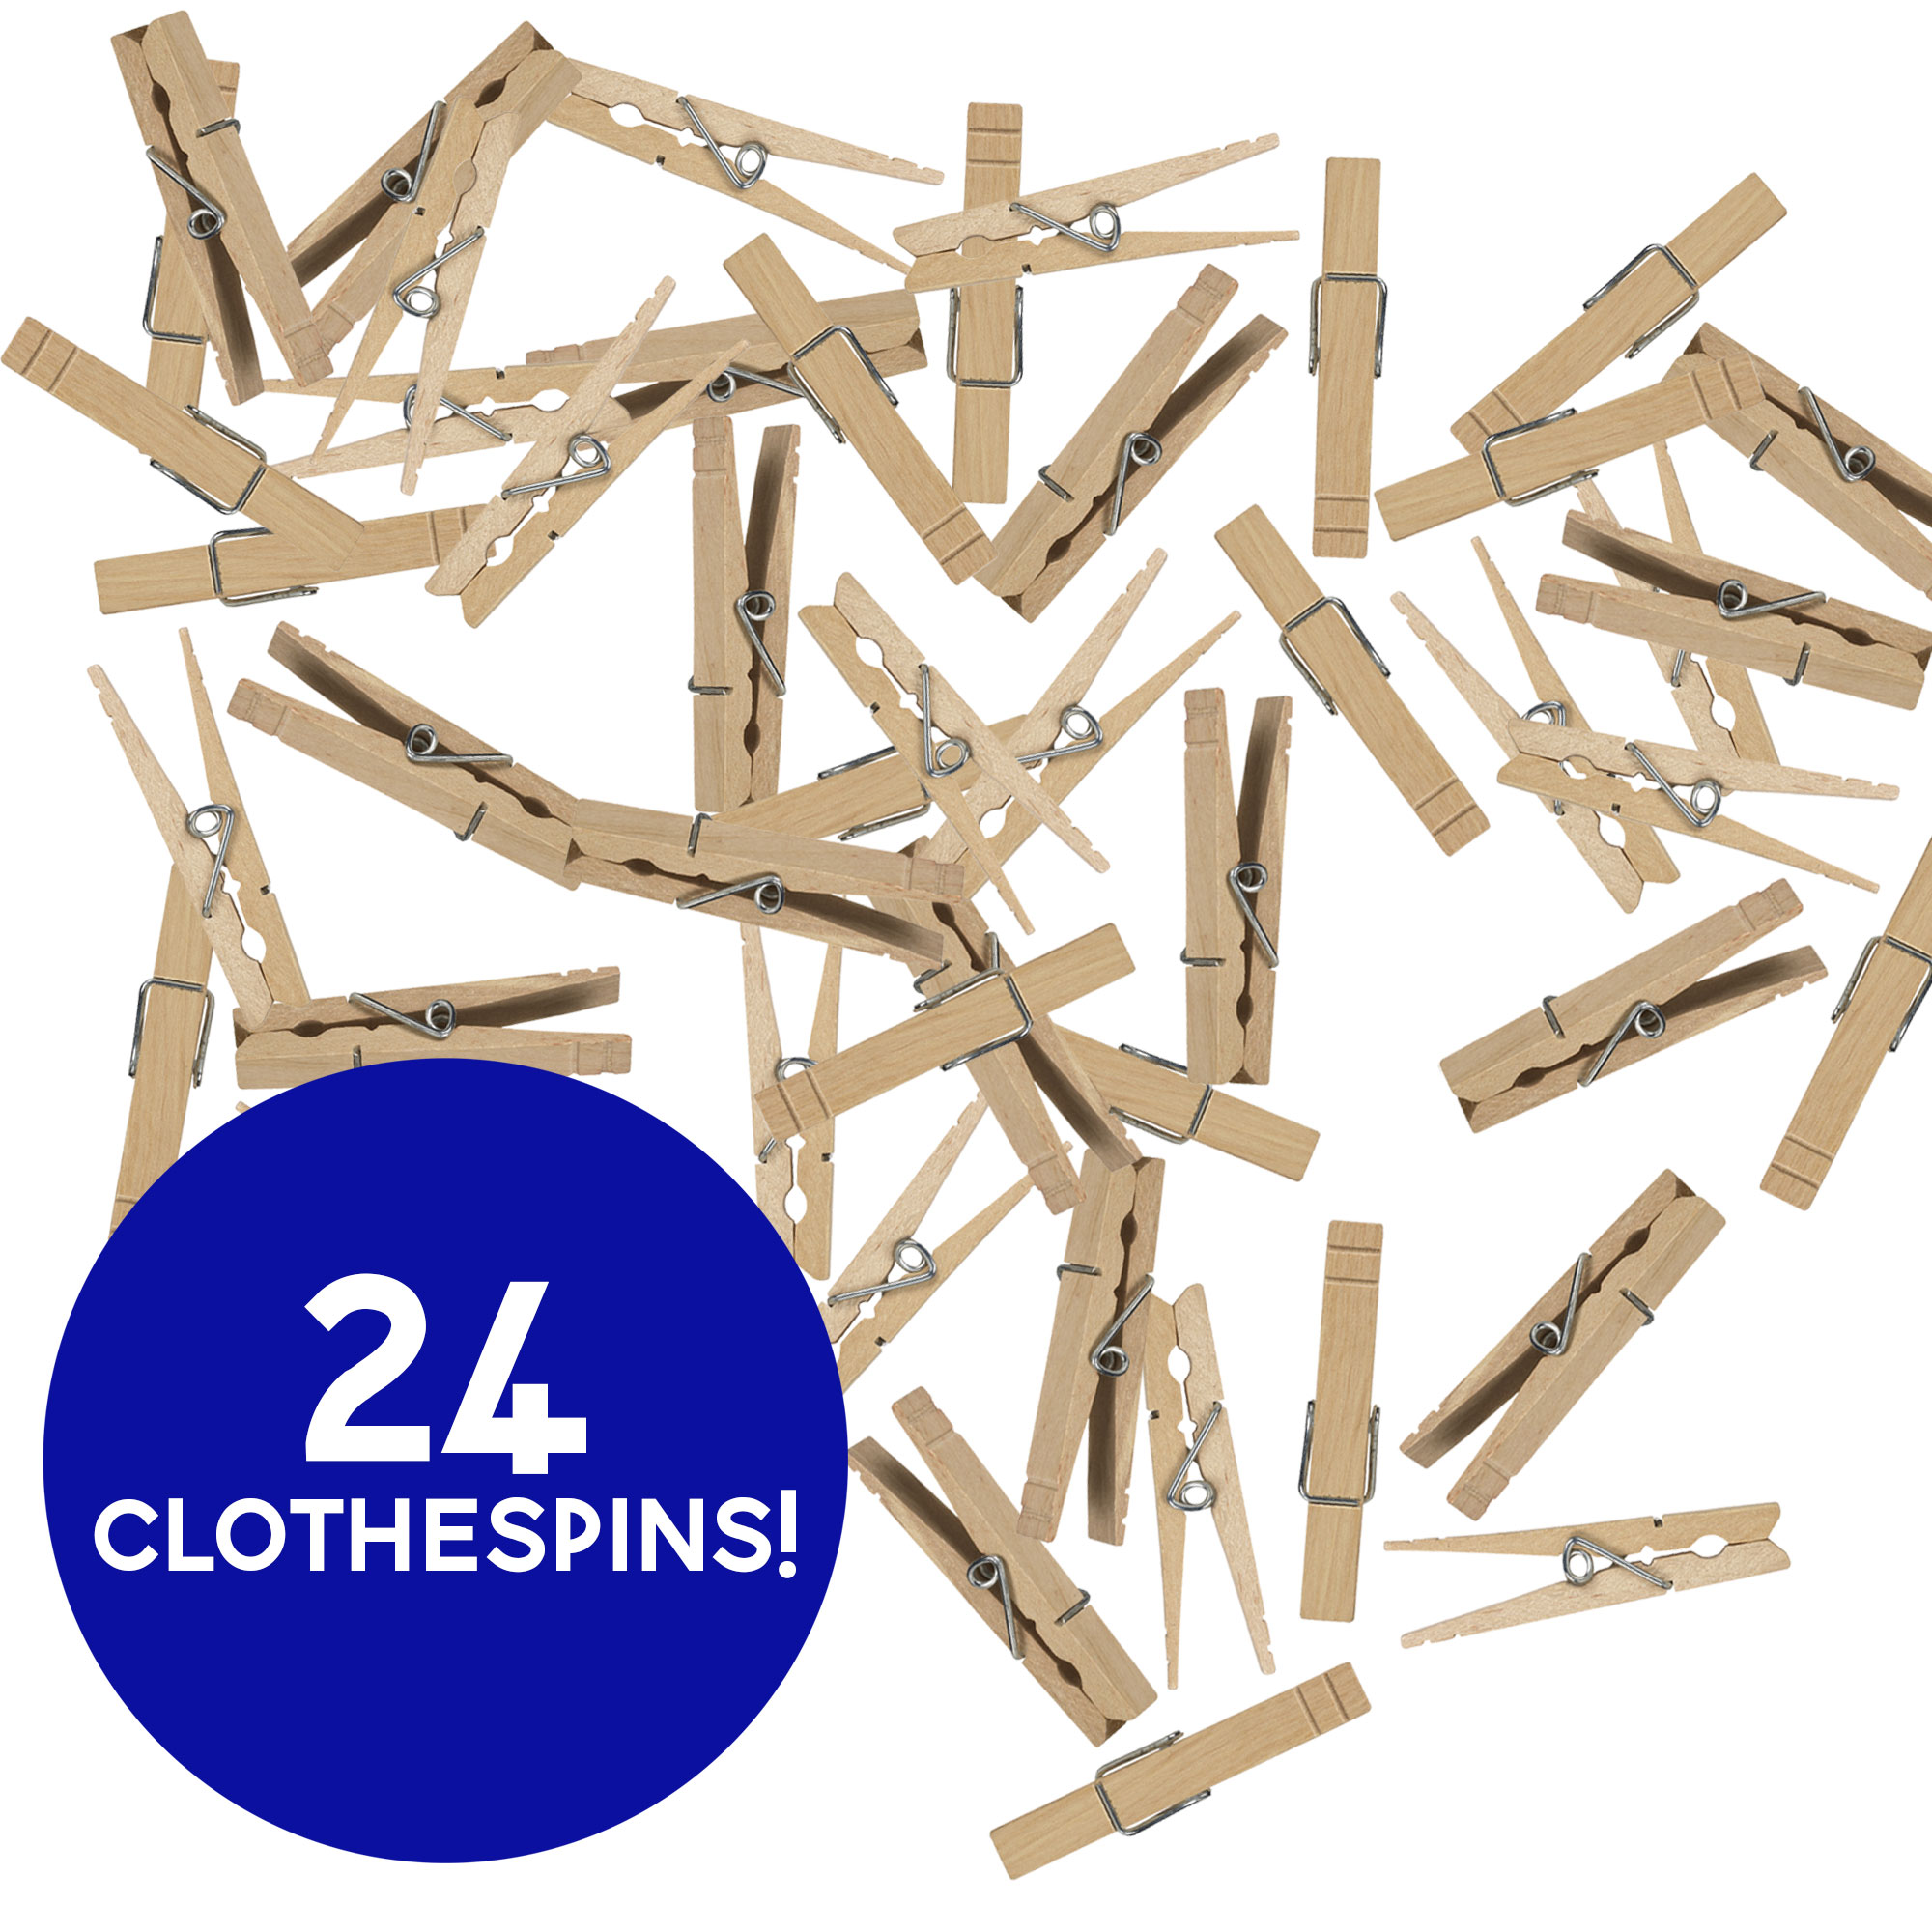 Go Create Small Wooden Clothespins, 24-Pack Small Wood Clothespins - image 2 of 4